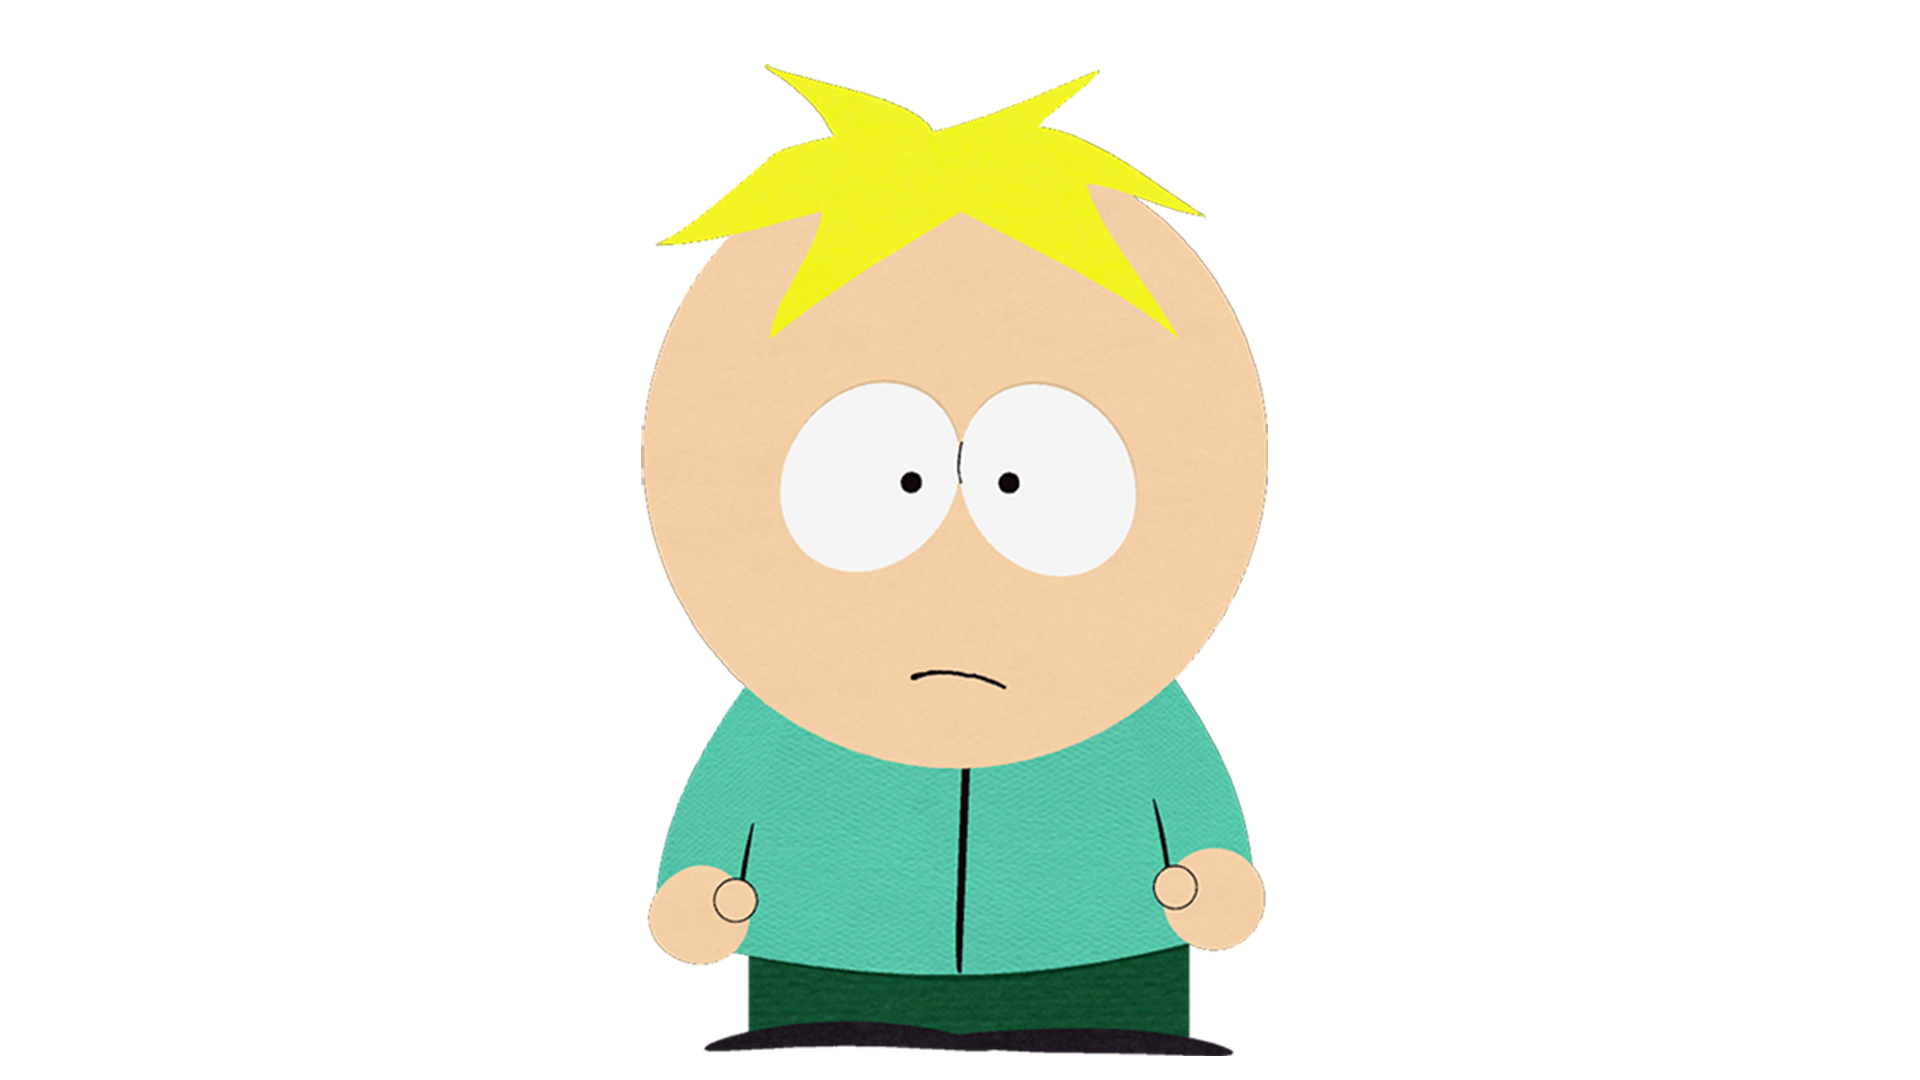 South Park PNG Free Image